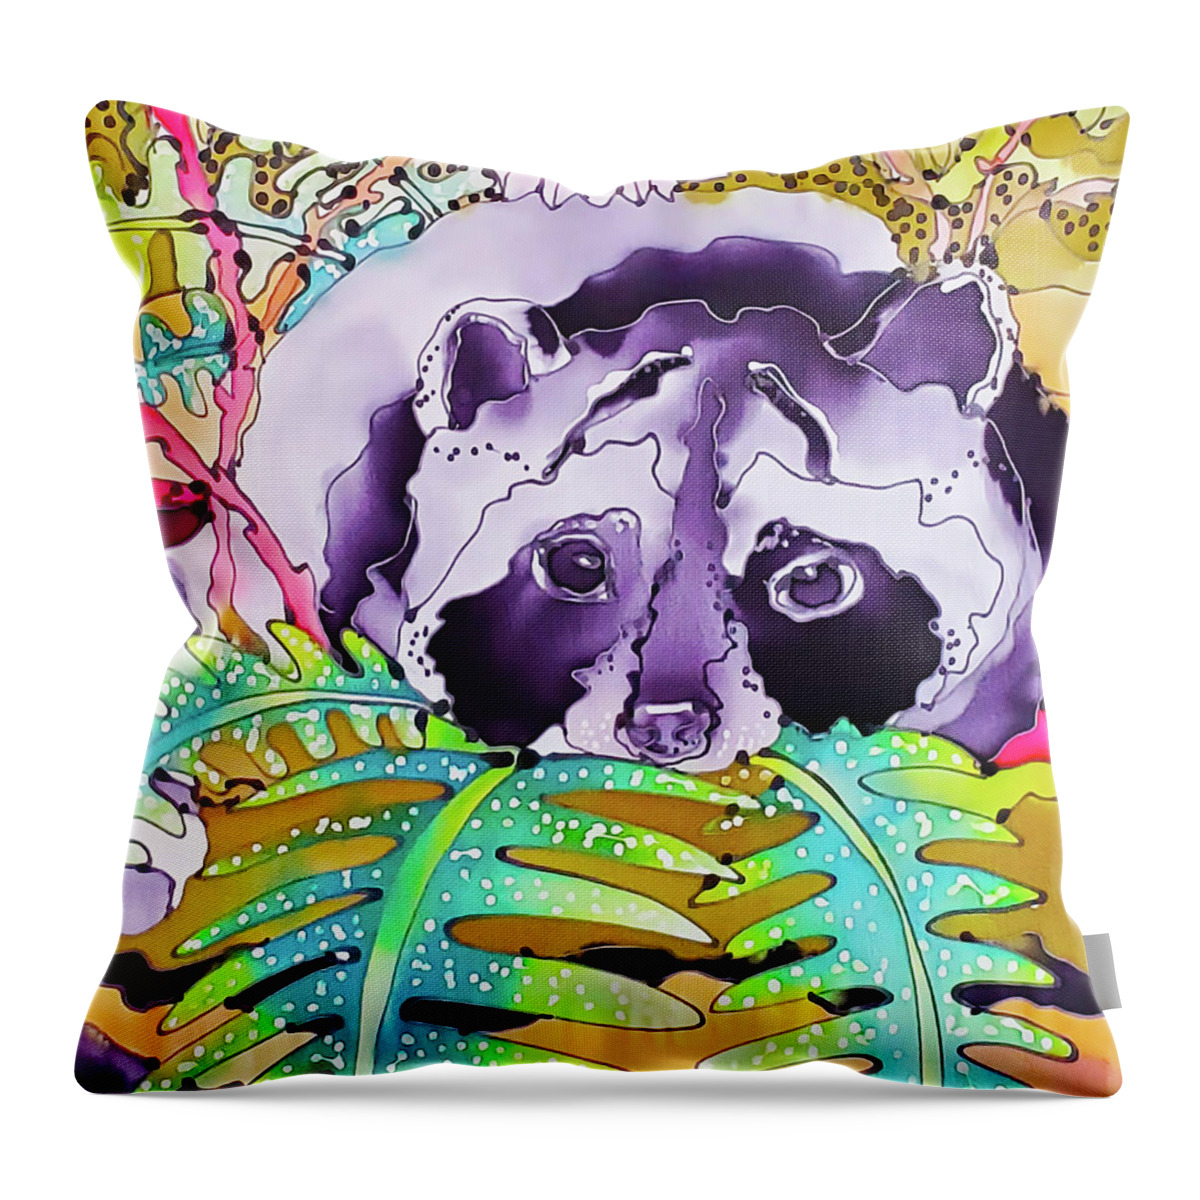 Hand Painted Silk Throw Pillow featuring the painting The Raccoon by Karla Kay Benjamin